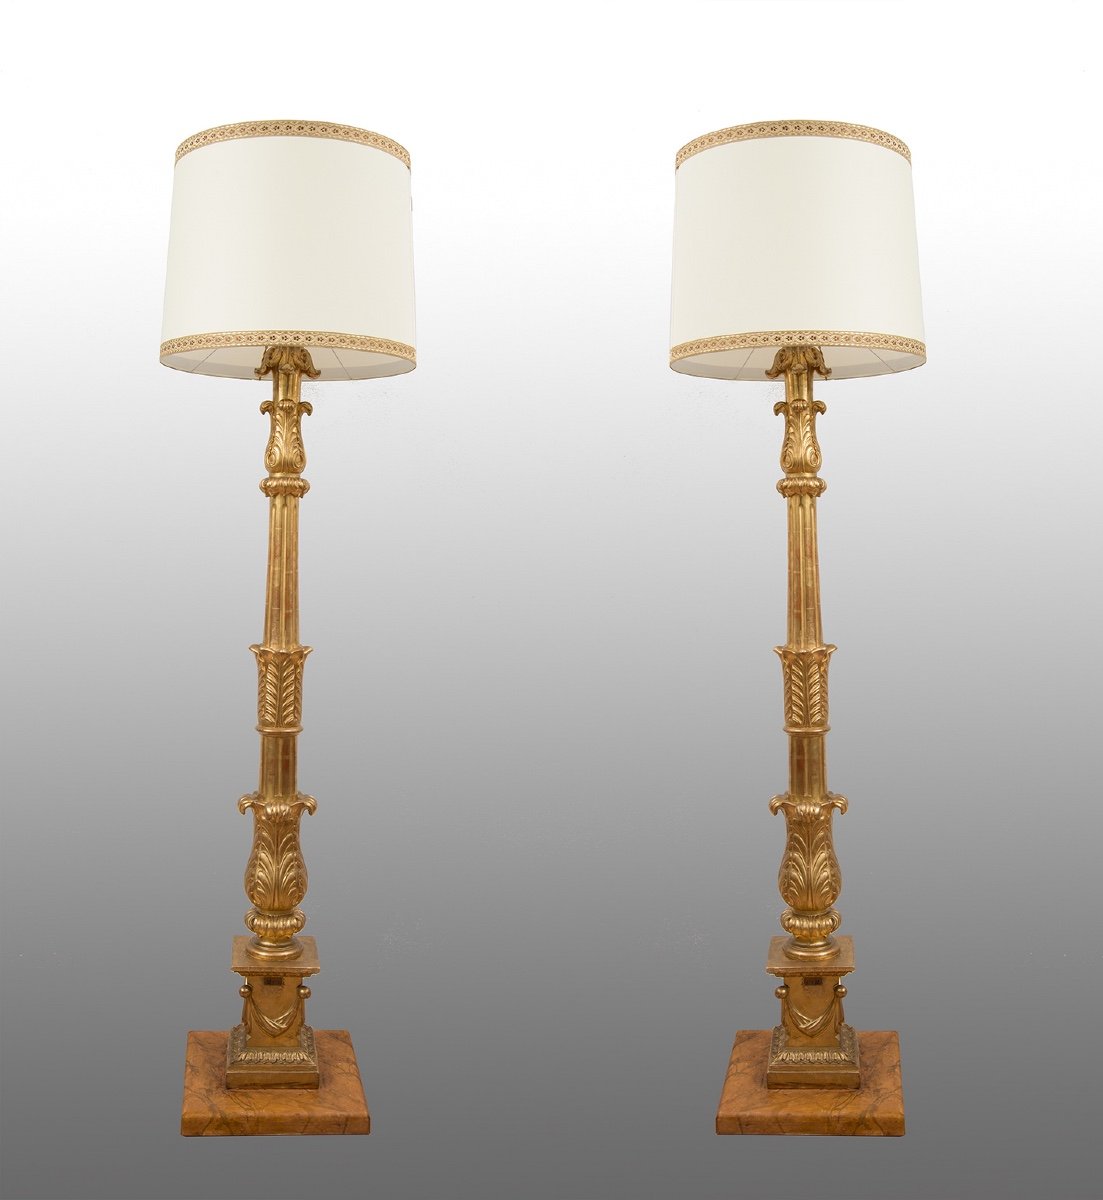 Pair Of Lamps From The Early 19th Century.